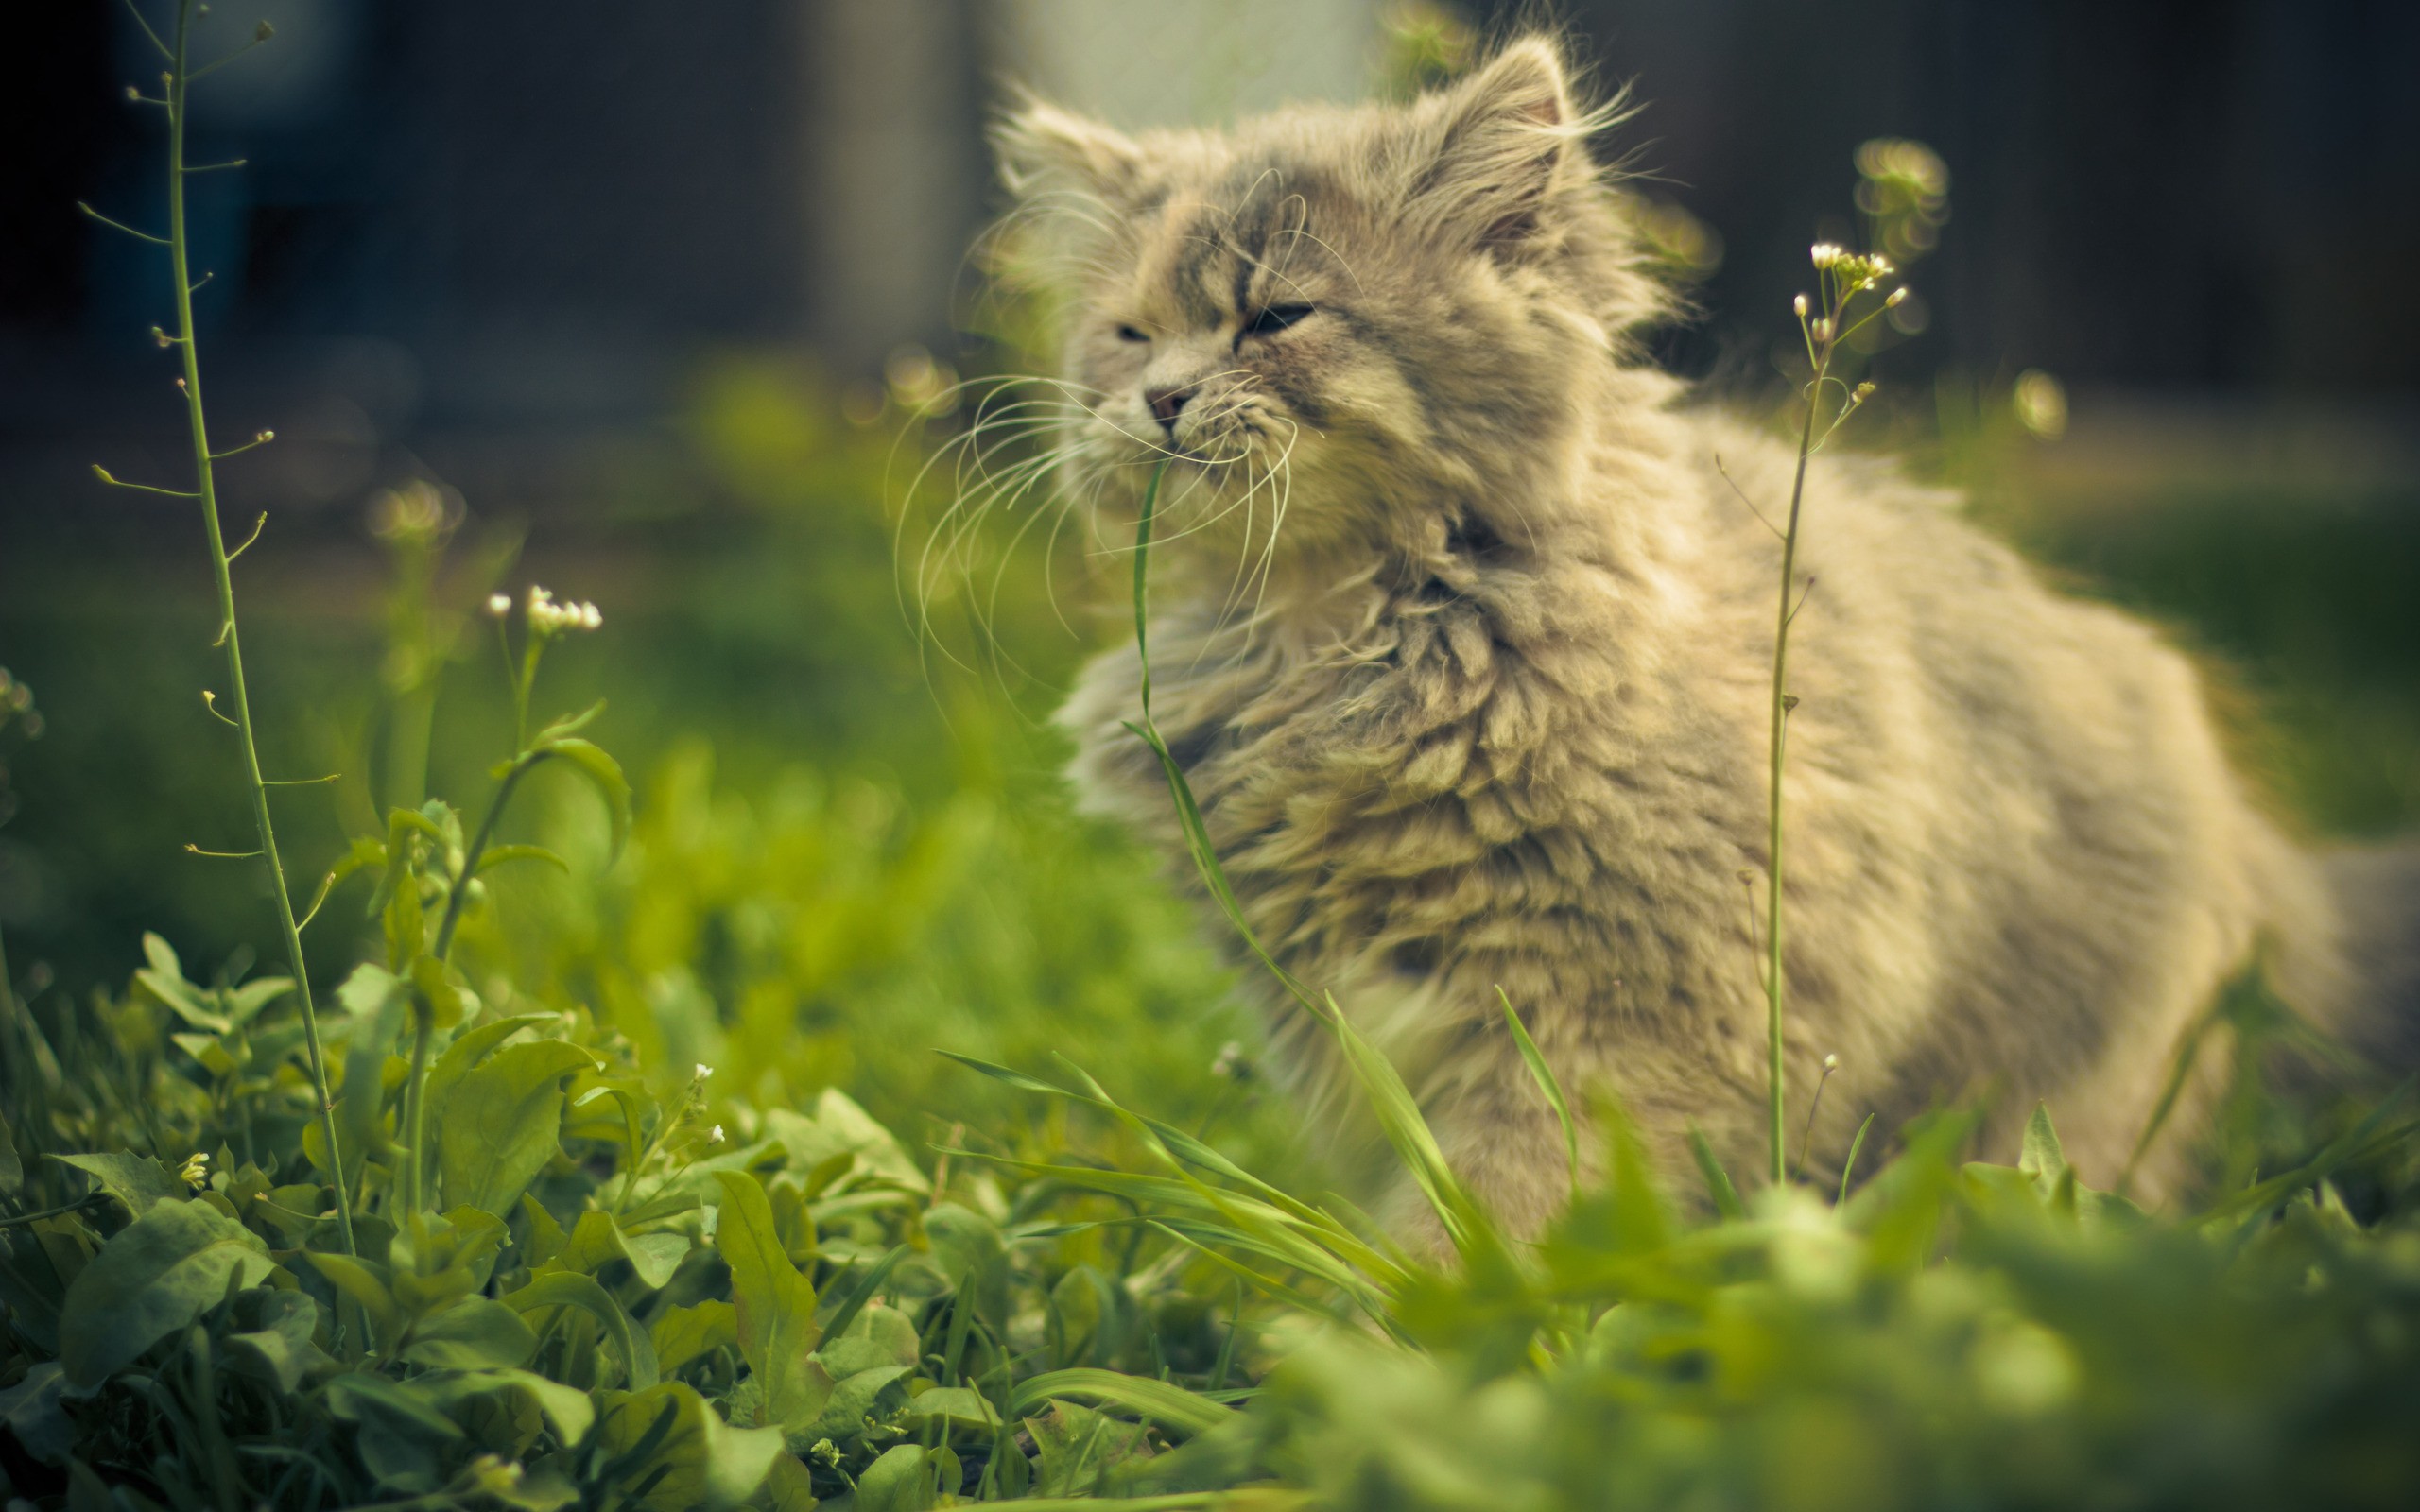  Cat Outdoors Google Wallpapers House Cat Outdoors Google Backgrounds